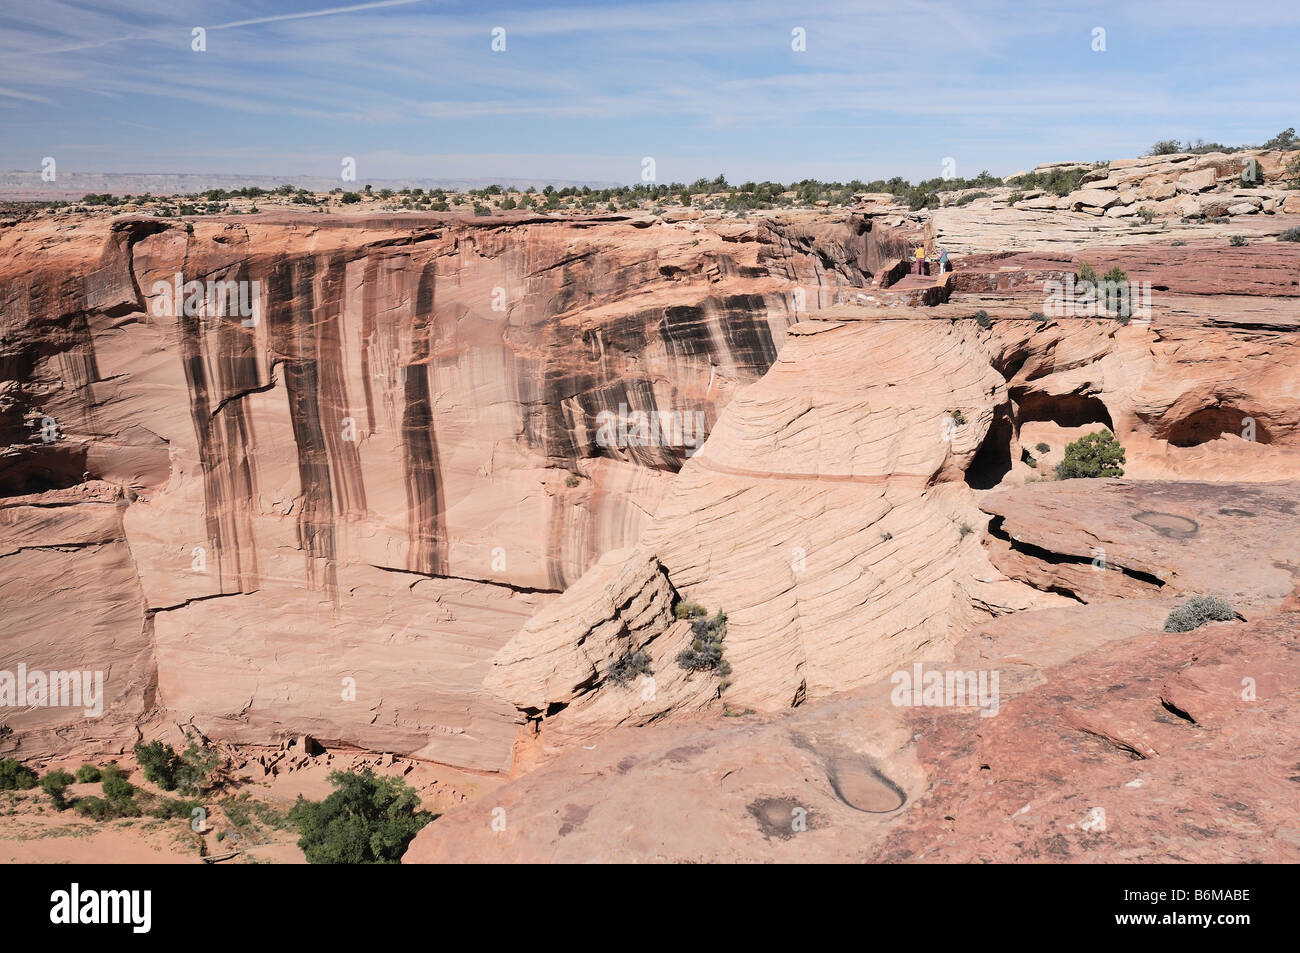 Overview of the Antelope House Ruin showing the viewpoint overlook with tourists at Canyon de Chelly National Monument Arizona Stock Photo